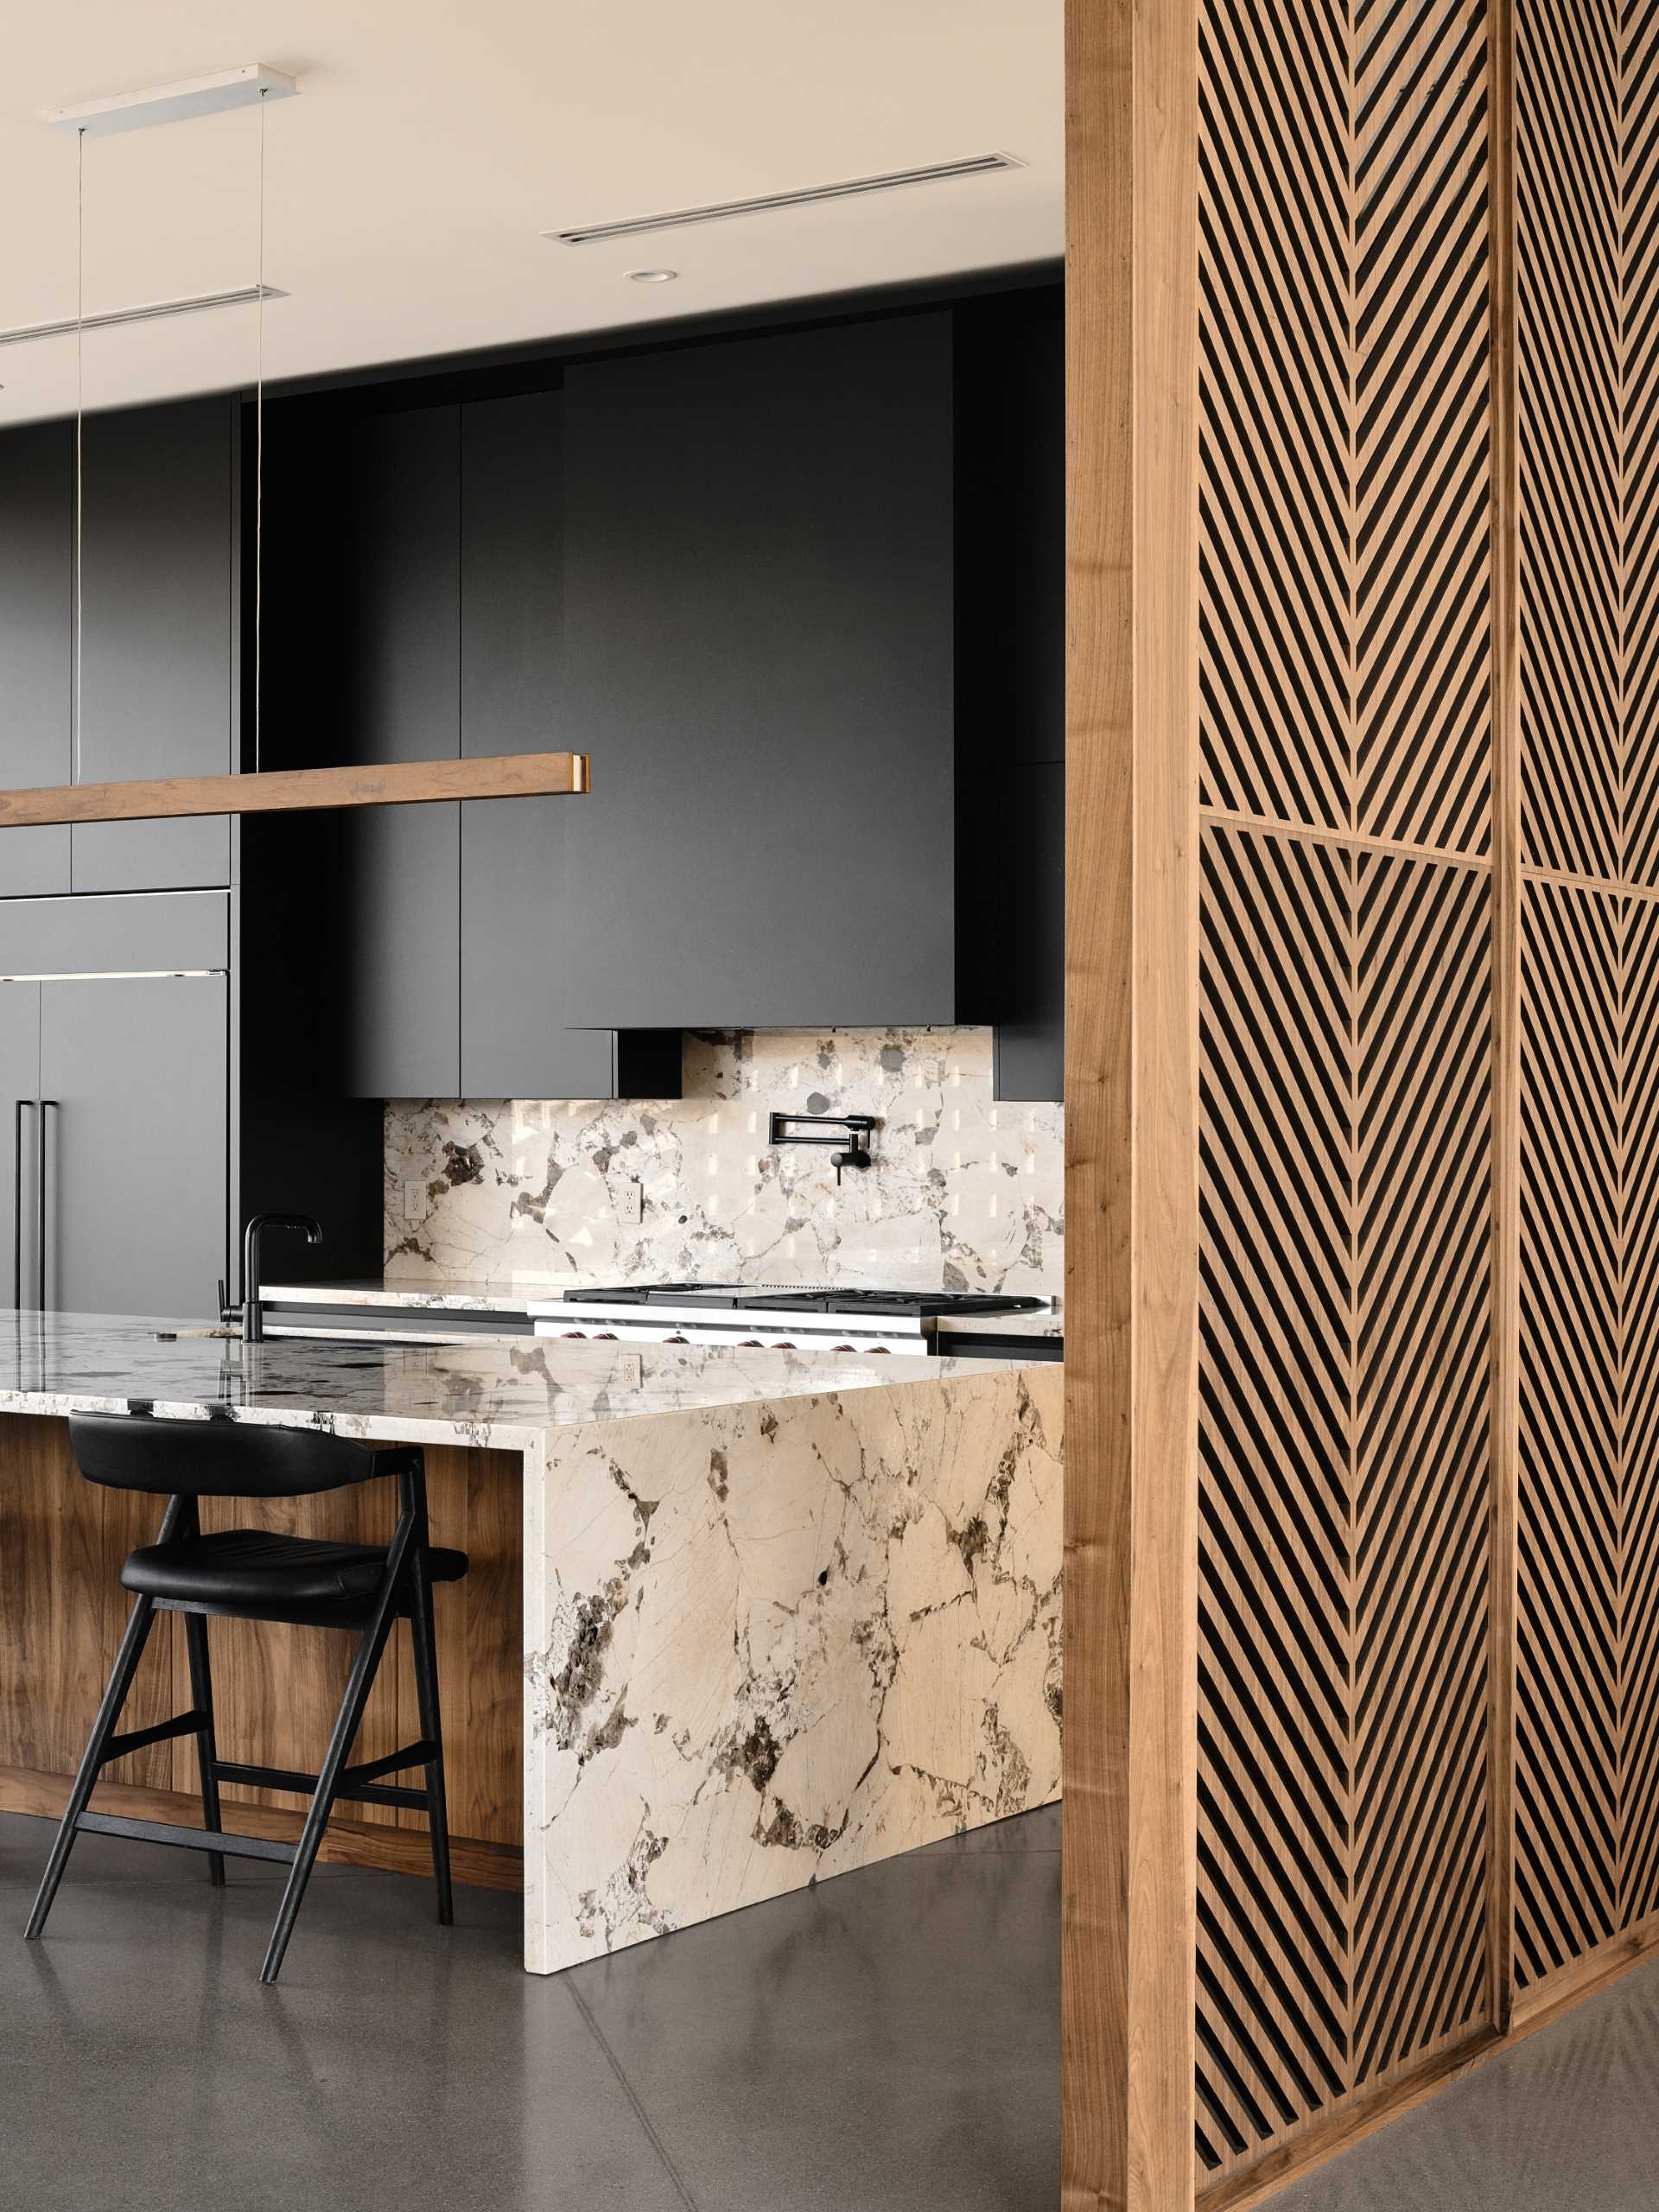 A modern kitchen with a wood partition screen with wood panels inspired by palm fronds.